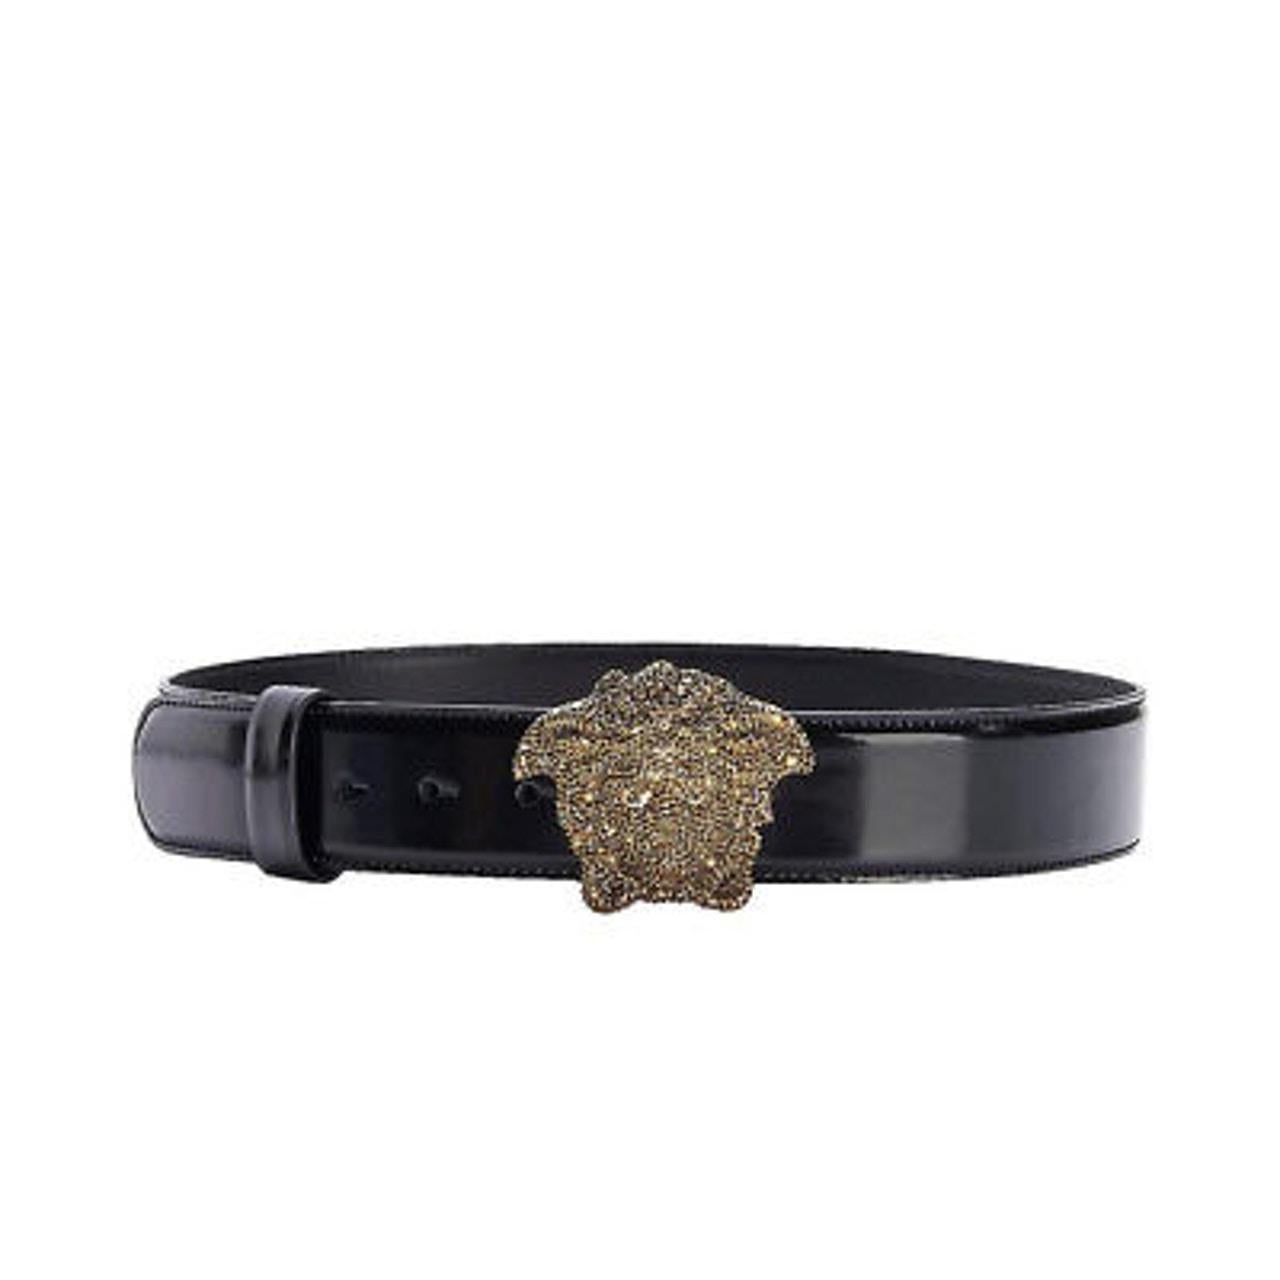 Versace

Crystal 3D Medusa Belt

Versace's exquisitely designed Crystal 3D Medusa Belt is a striking statement piece.

Black smooth leather

Gold Crystals

Gold hardware

Made in Italy

1.5